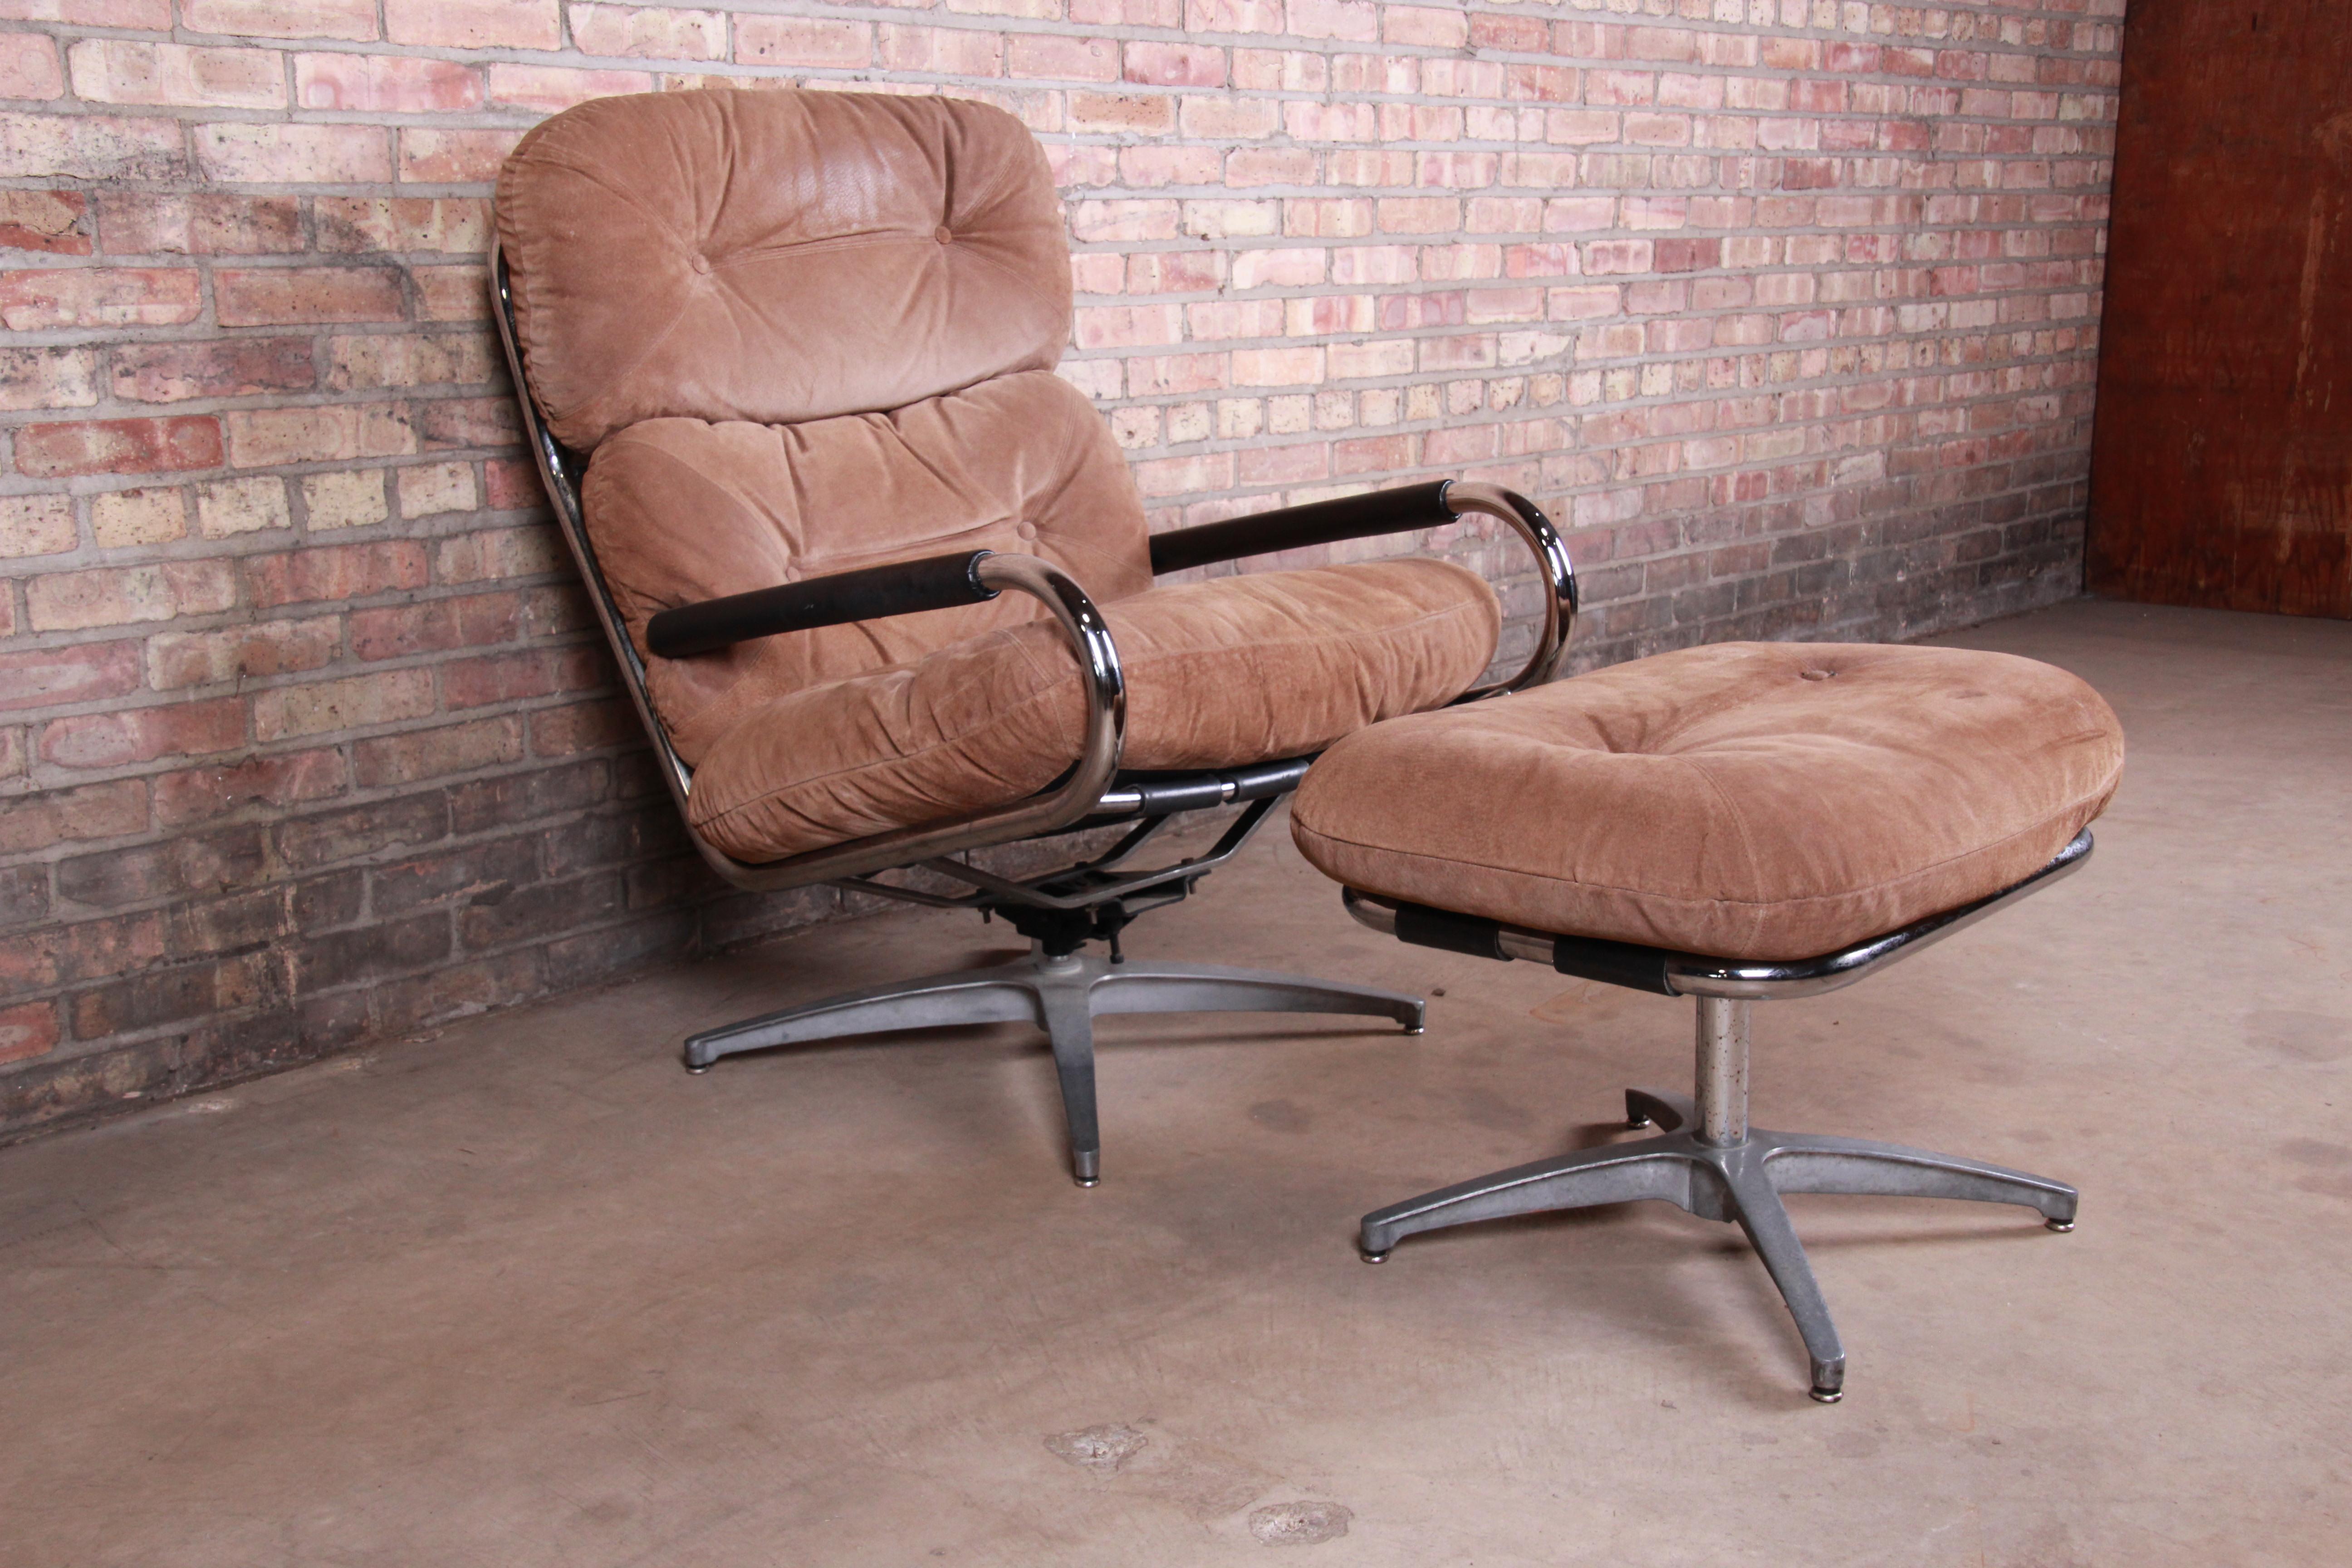 A gorgeous Mid-Century Modern swivel lounge chair and ottoman

Designed for Directional

USA, circa 1981

Chrome frame, with leather straps and armrests and tufted suede upholstery.

Measures: 26.5